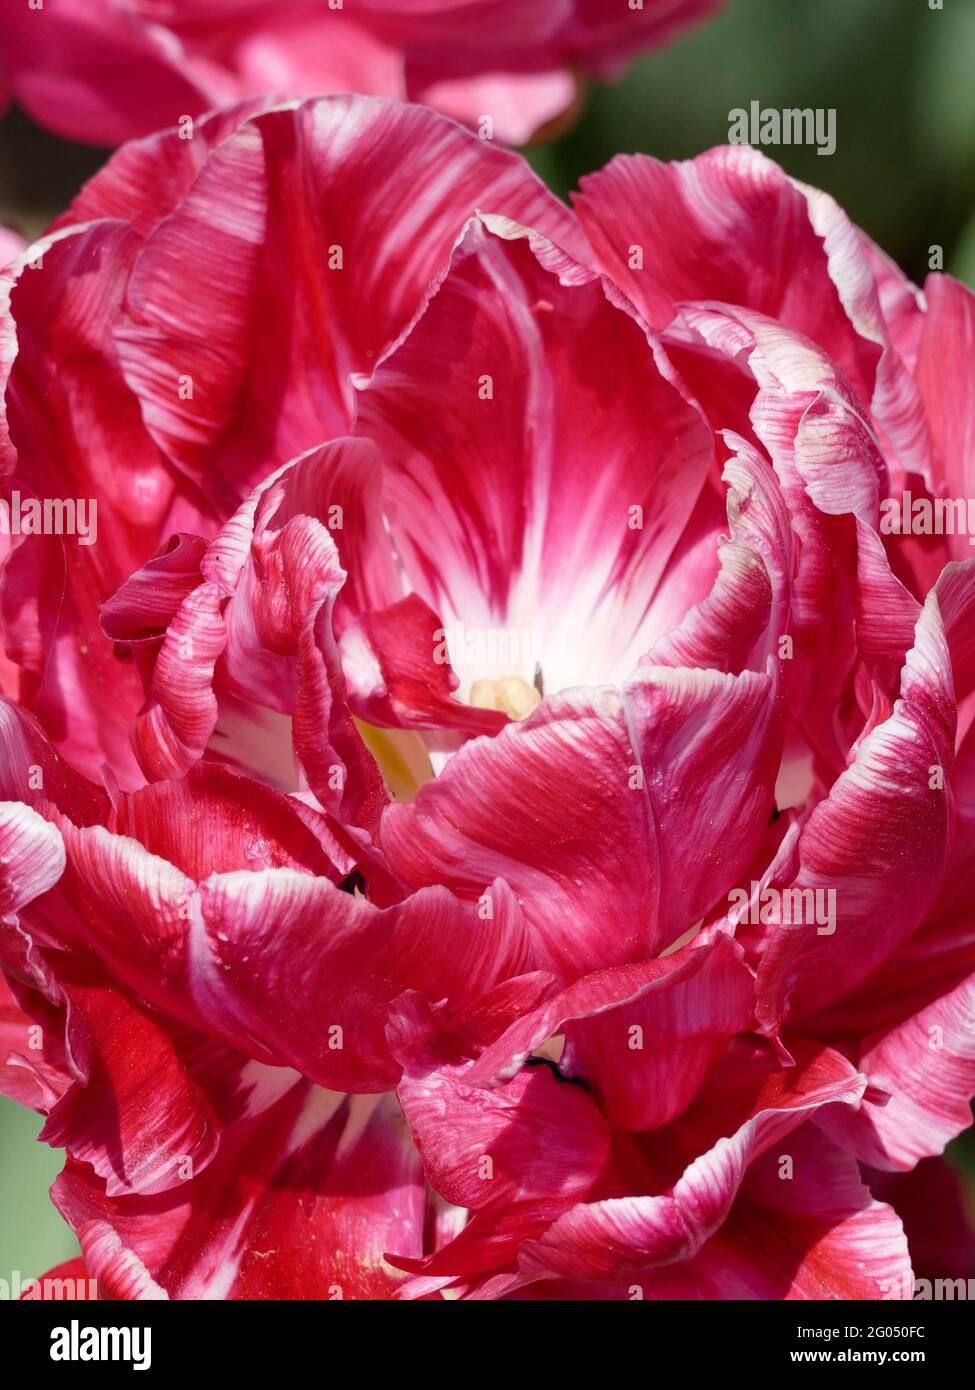 A Close Up Photograph of a Backpacker Tulip with Double Pink and White Streaked Petals Fully Blossomed Stock Photo